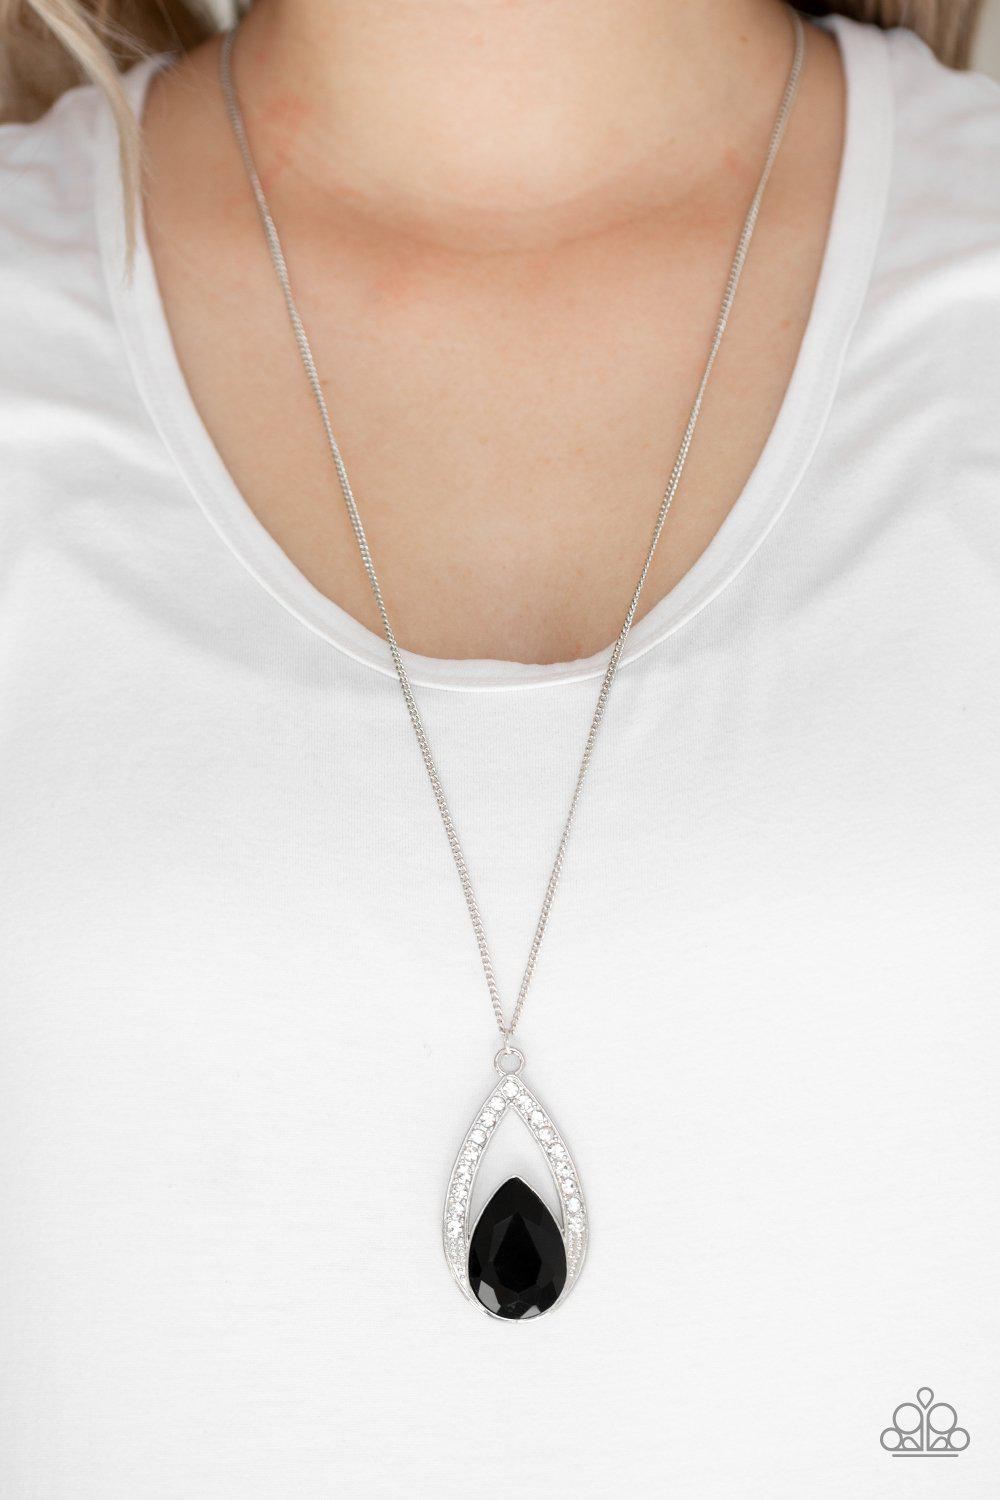 Notorious Noble Black Rhinestone Pendant Necklace - Paparazzi Accessories-CarasShop.com - $5 Jewelry by Cara Jewels